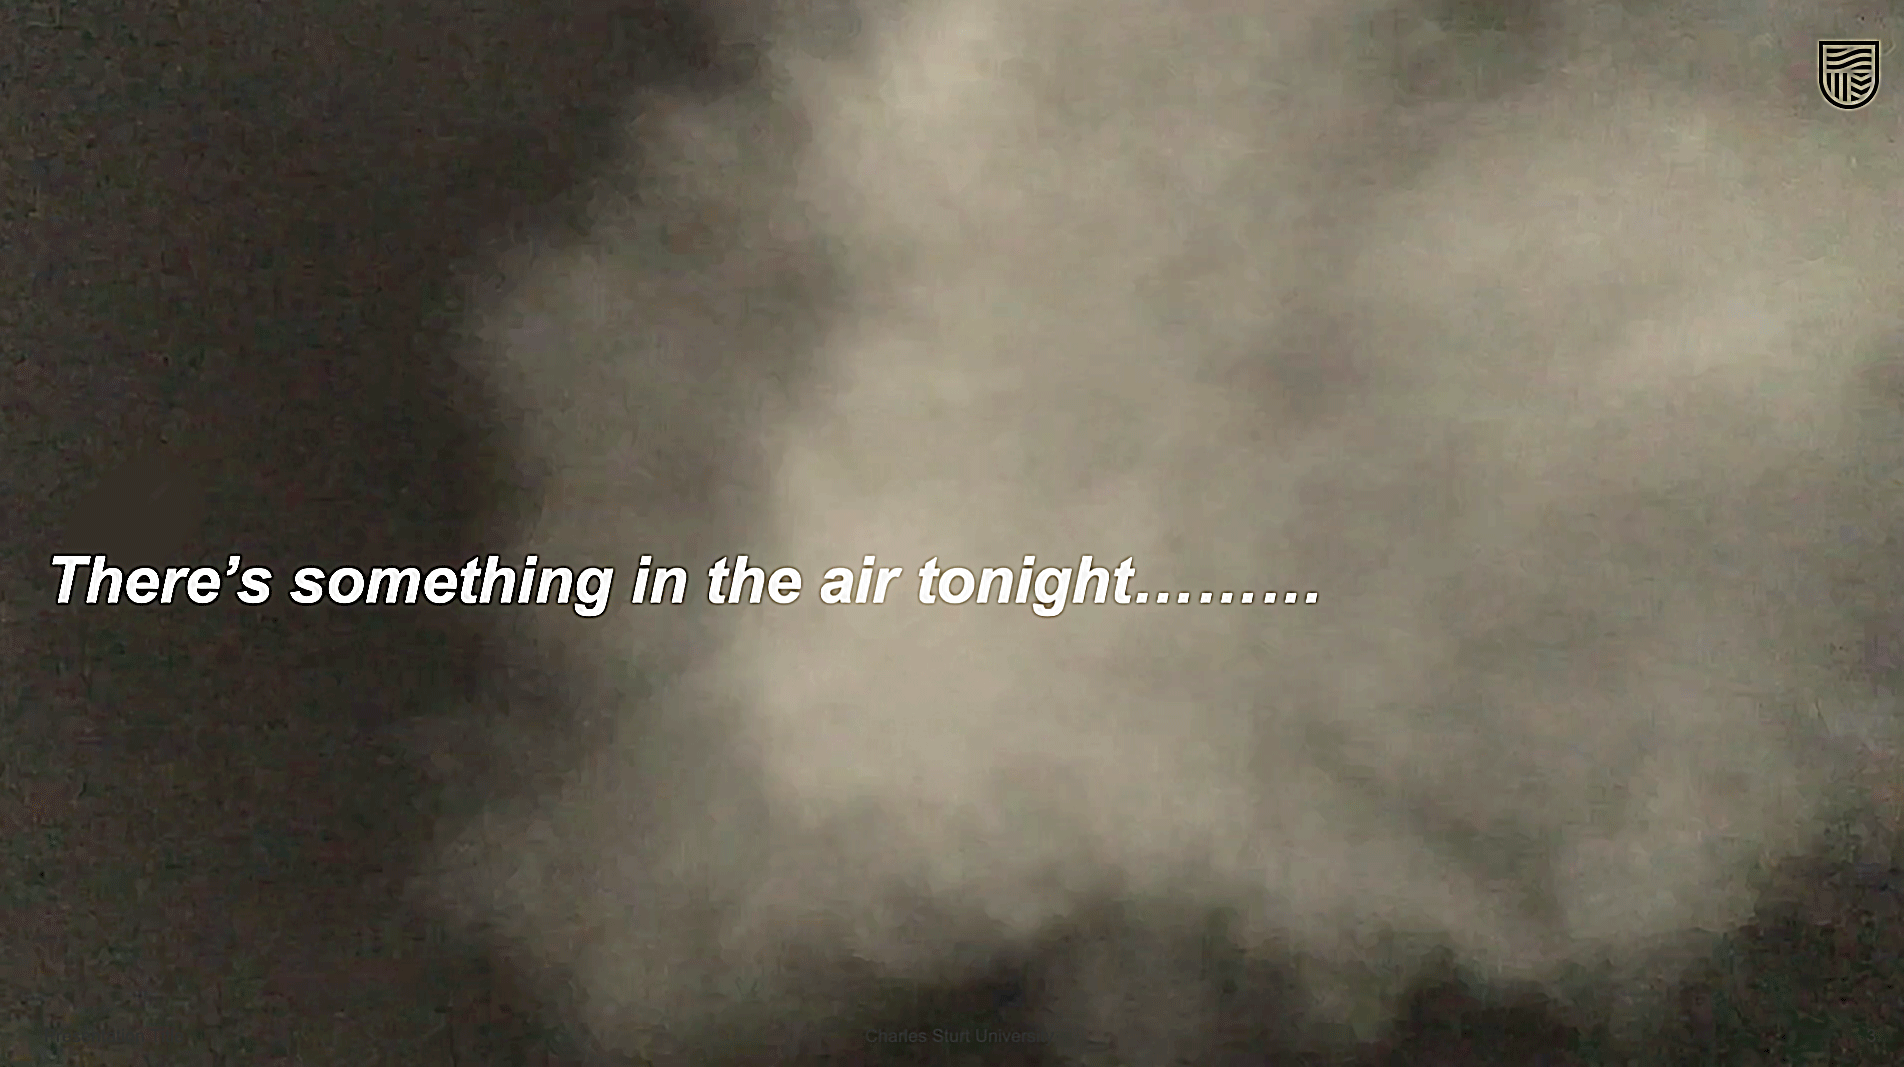 There was something in the air